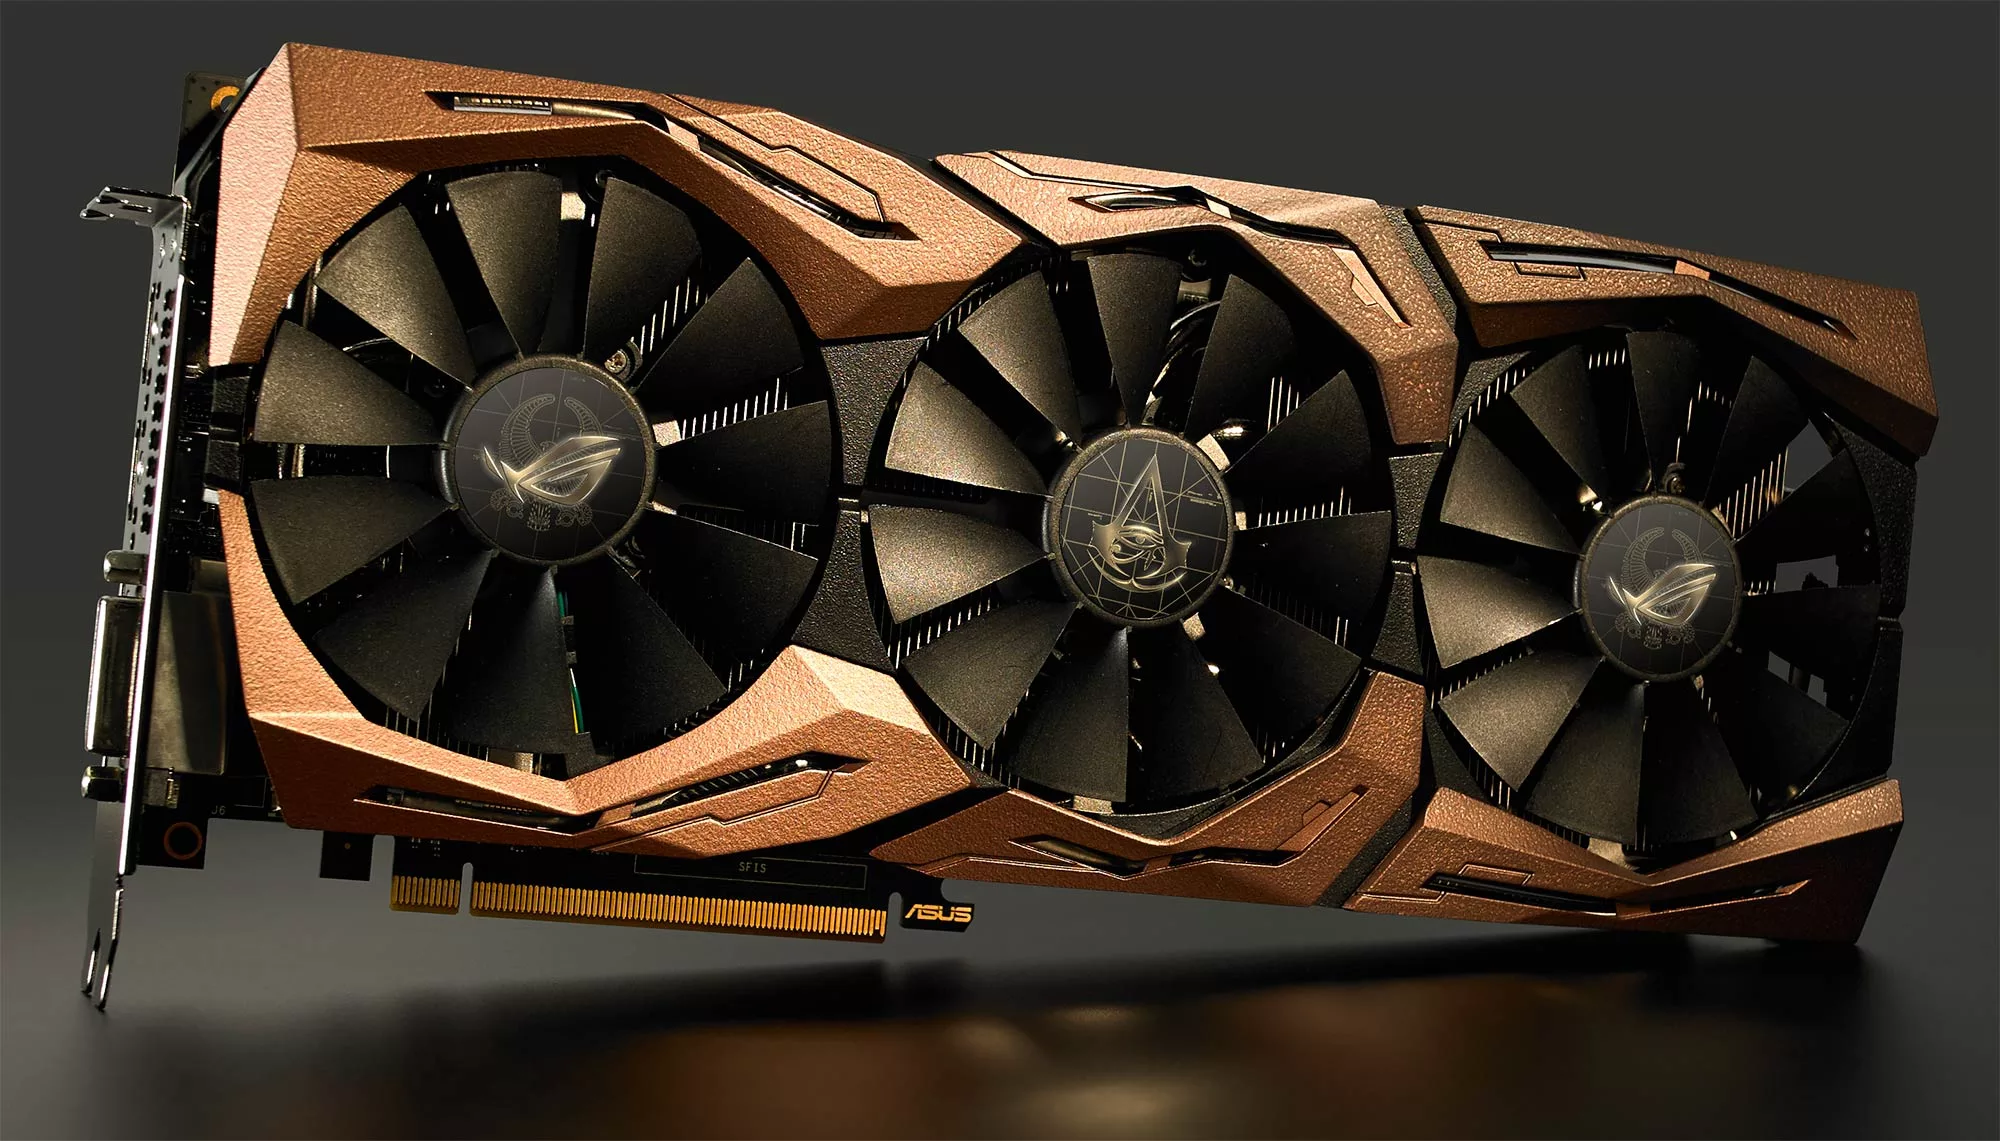 Check our limited edition Strix 1080 Ti graphics card for Assassin's Creed: Origins | ROG - Republic of Gamers Global